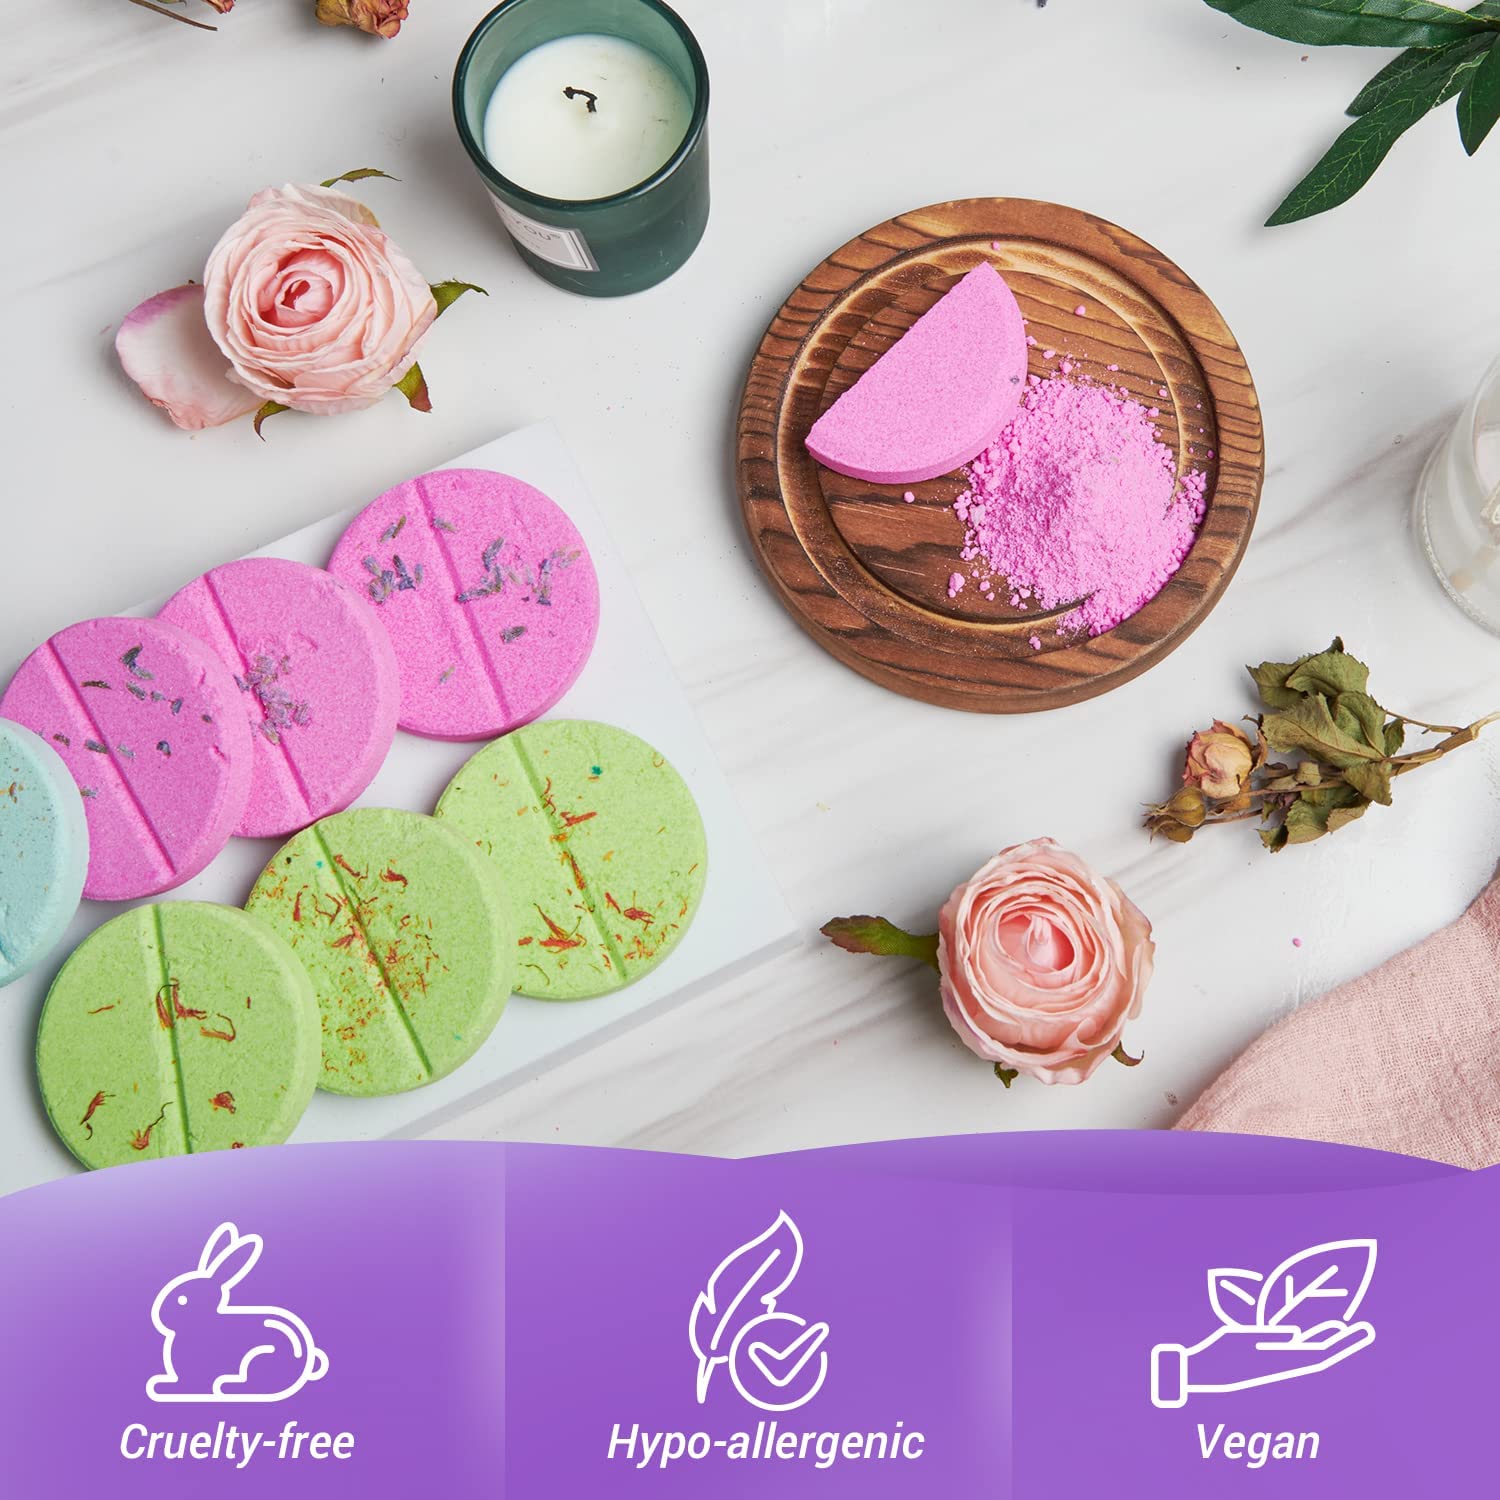 【US ONLY】EFFILAND Shower Steamers Aromatherapy-Lavender(7pcs)